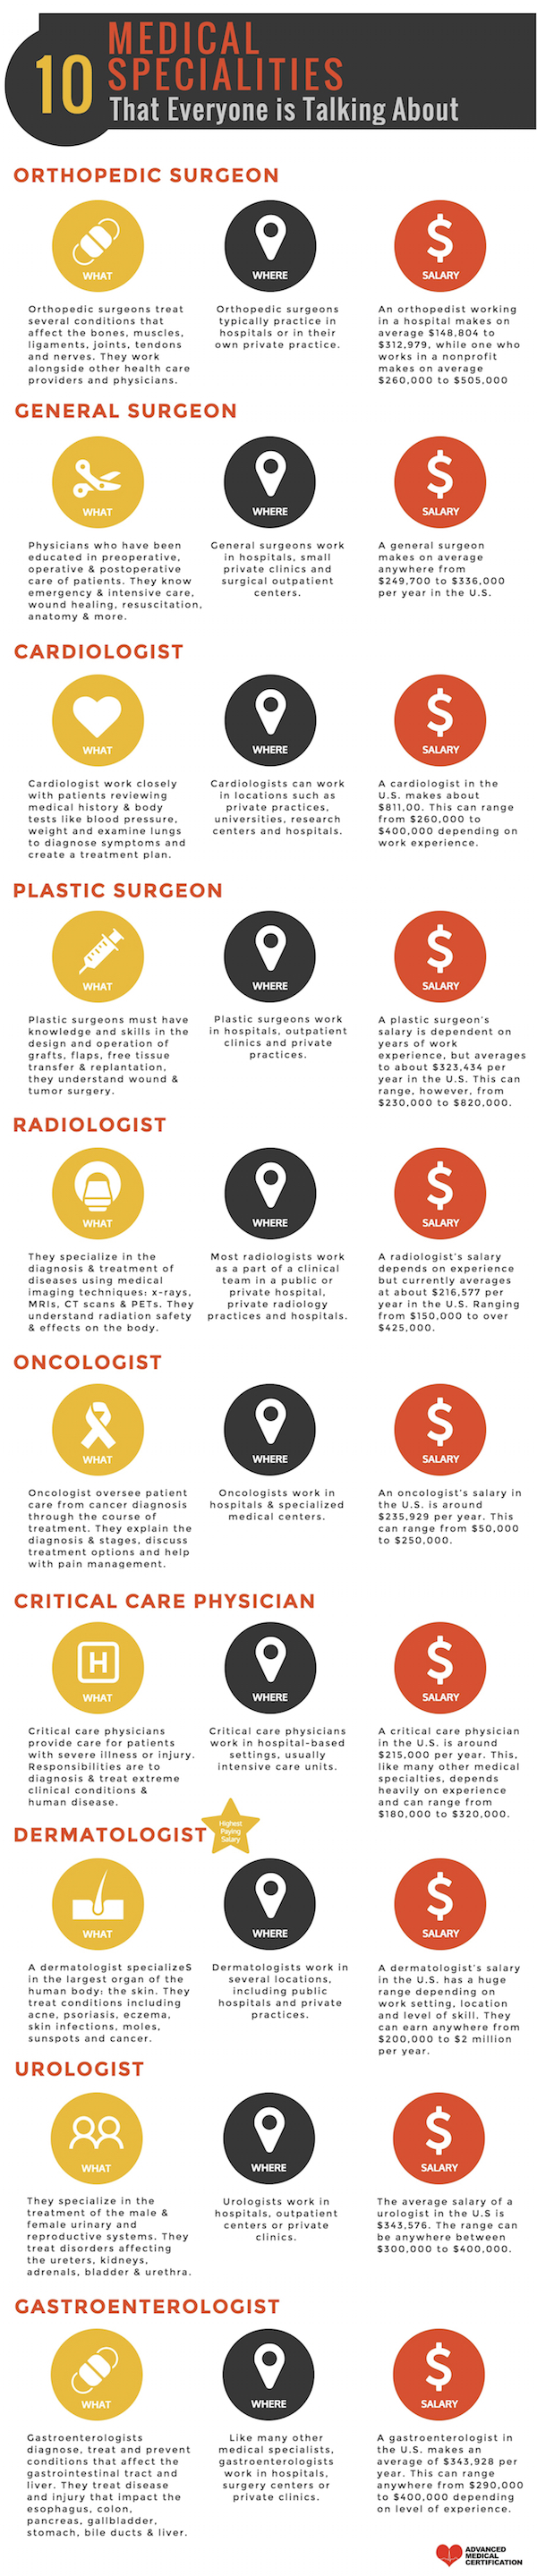 top 10 medical specialities infographic